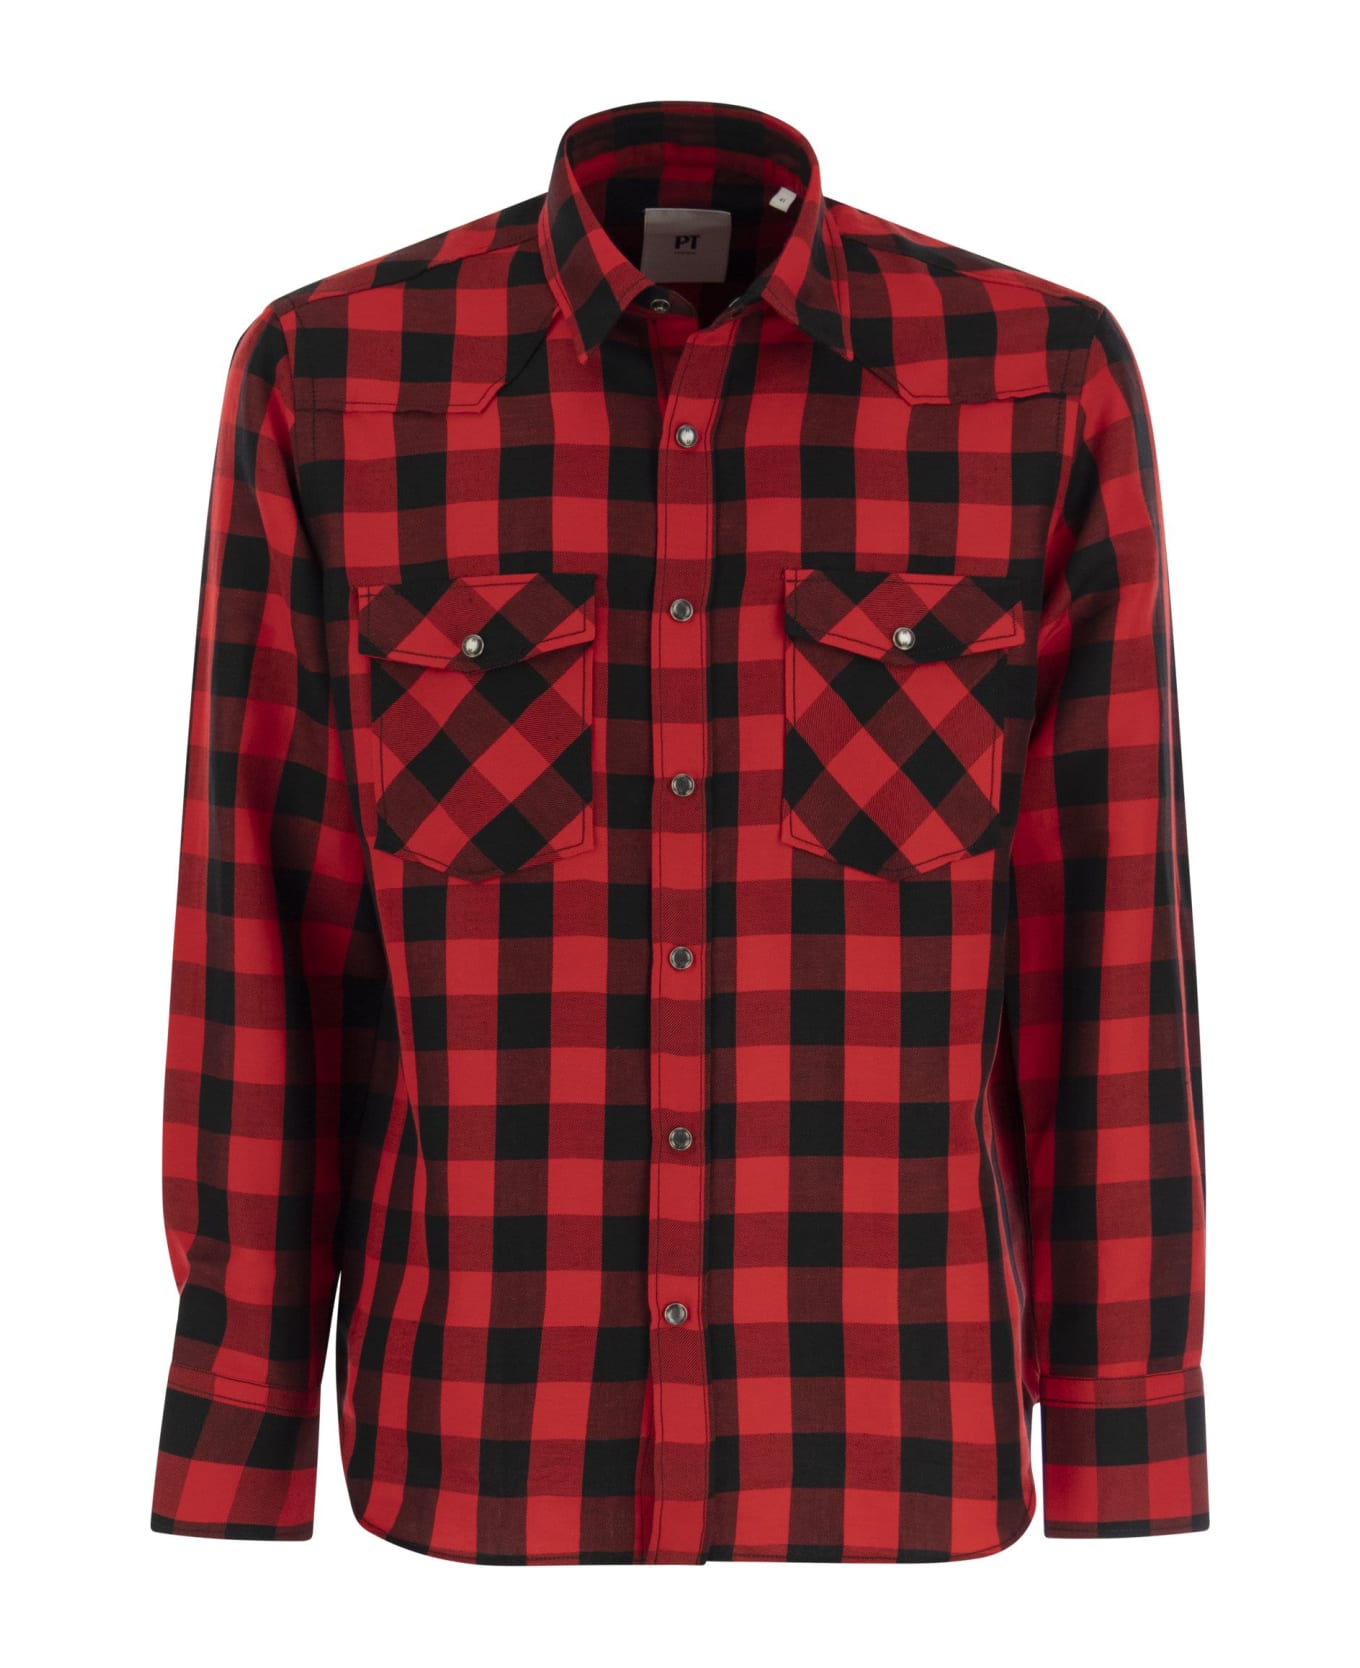 PT01 Checked Shirt In Cotton And Linen Blend - Red/black